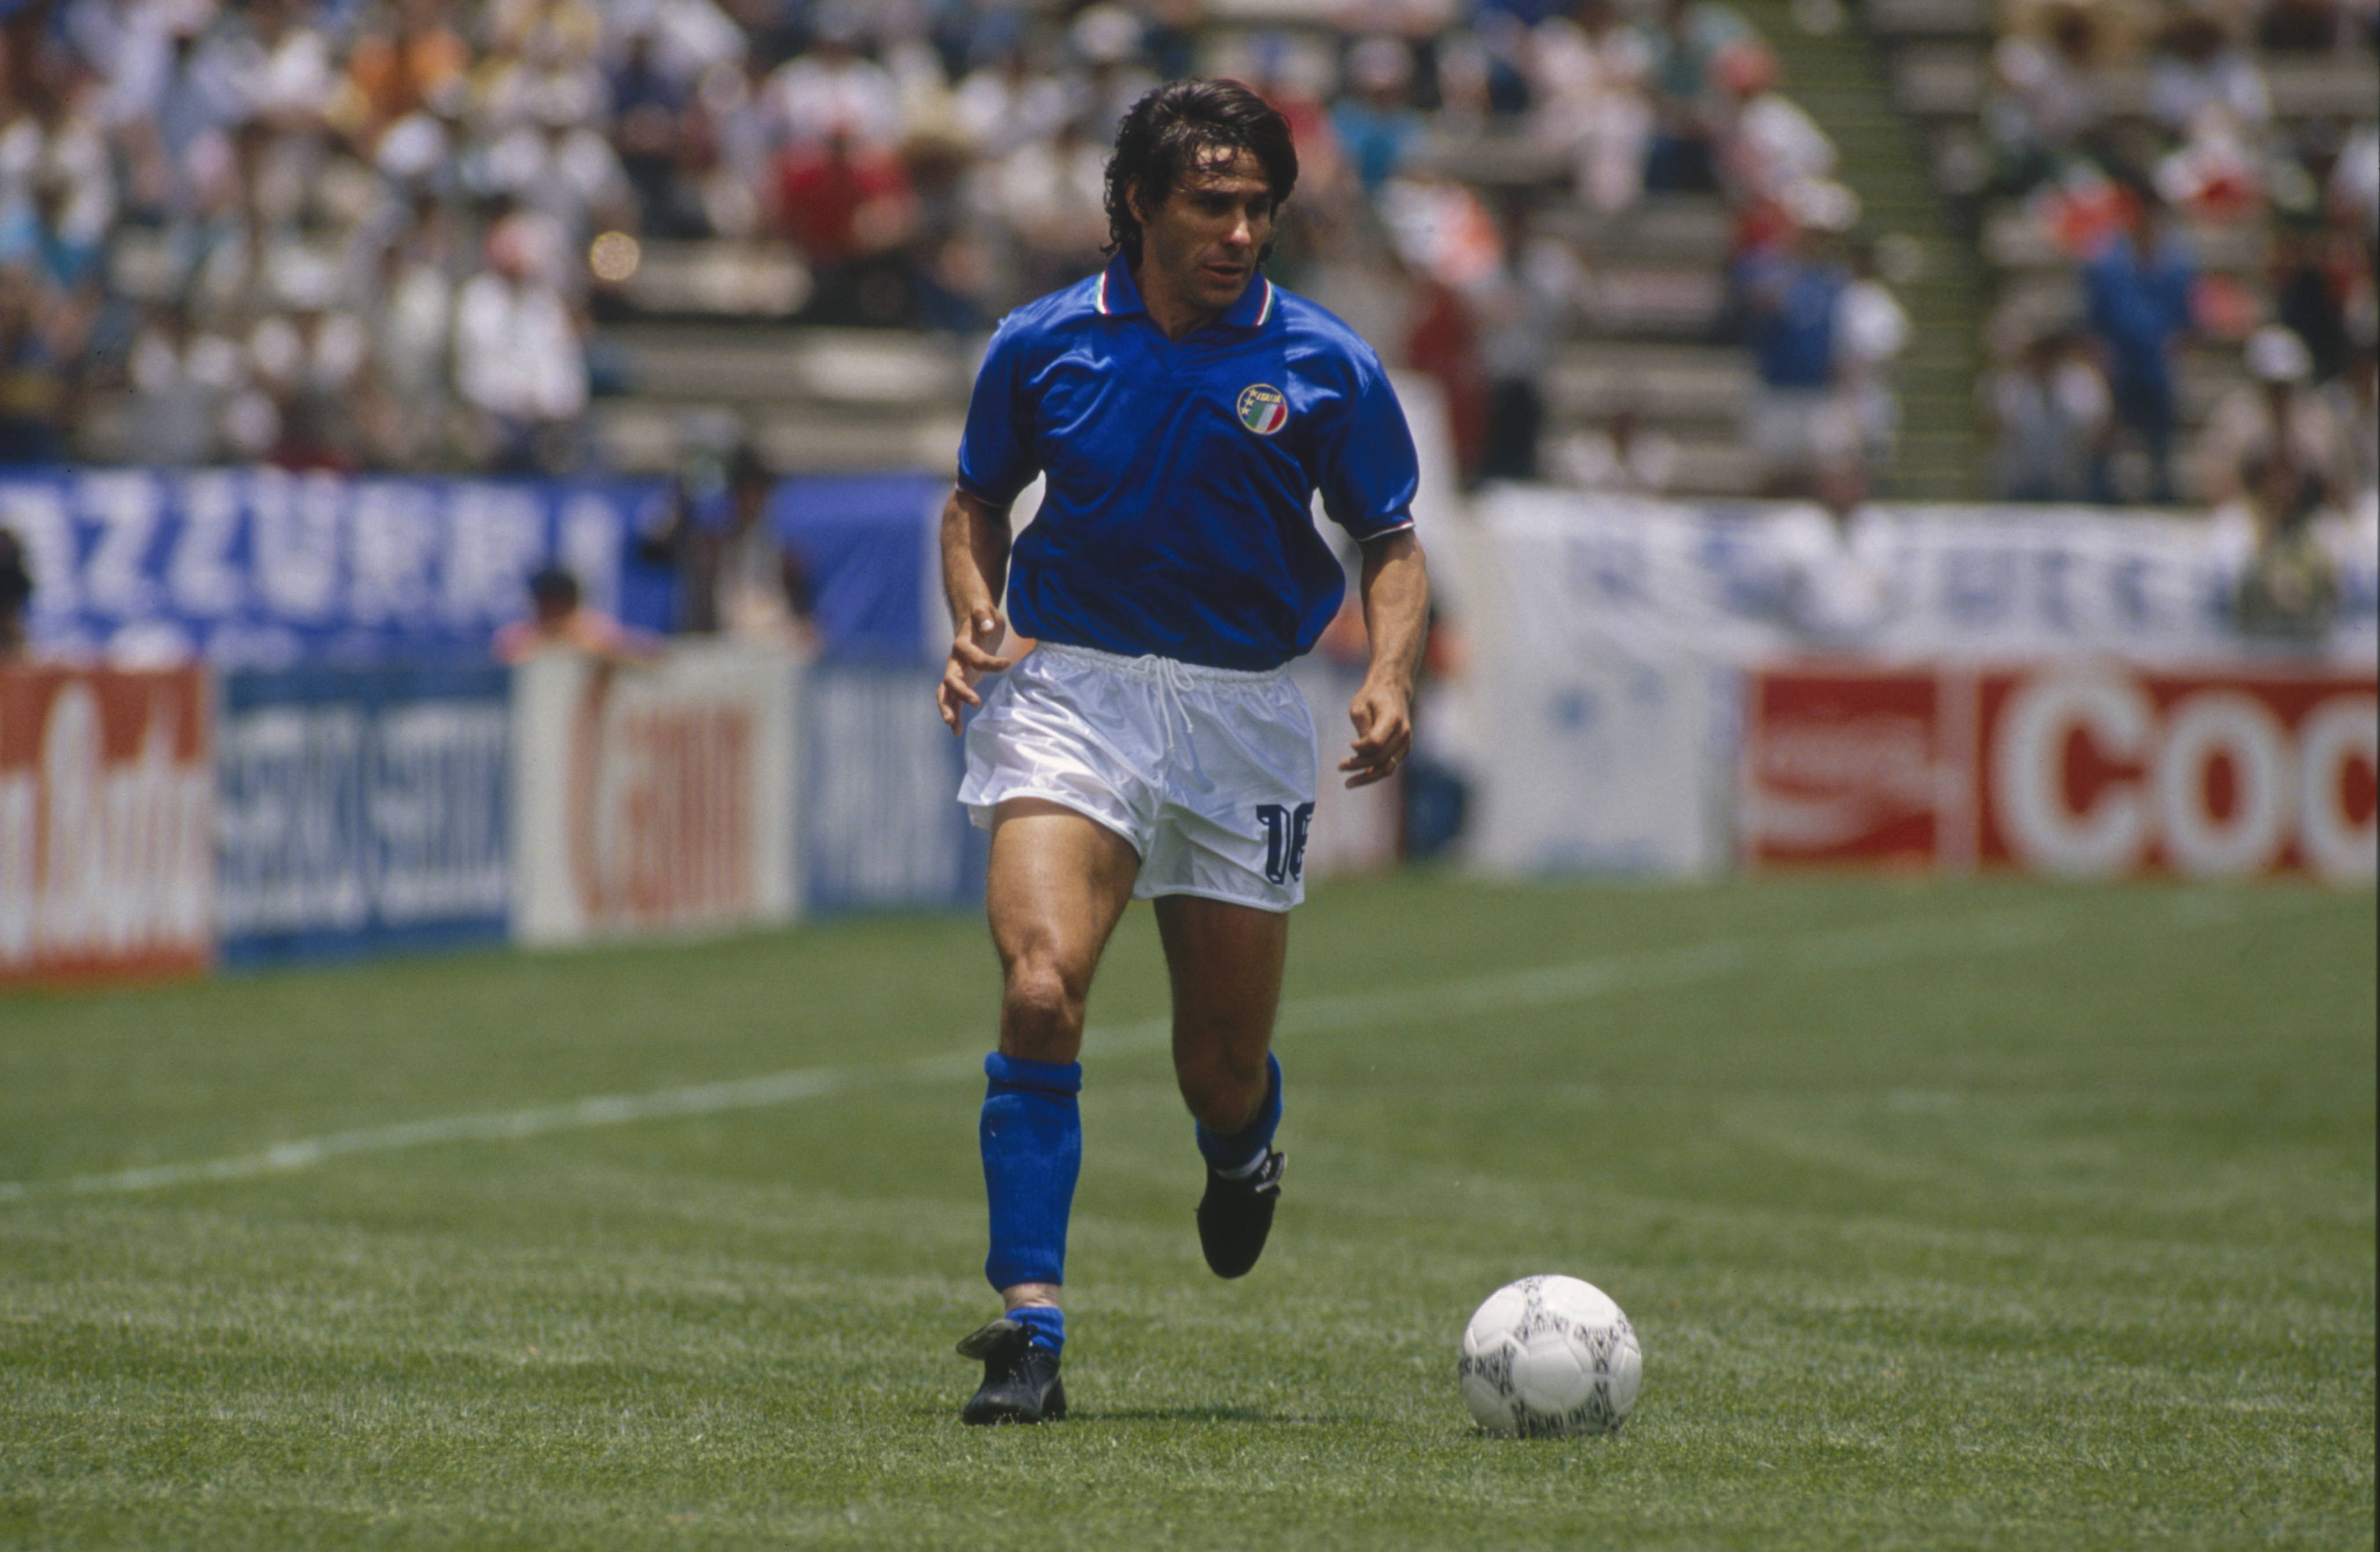 PEUBLA - JUNE 5:  Bruno Conti of Italy runs with the ball during the FIFA World Cup 1986 Group A match between Argentina and Italy held on June 5, 1986 at the Cuauhtemoc Stadium in Peubla, Mexico. The match ended in a 1-1 draw. (Photo by David Cannon/Gett